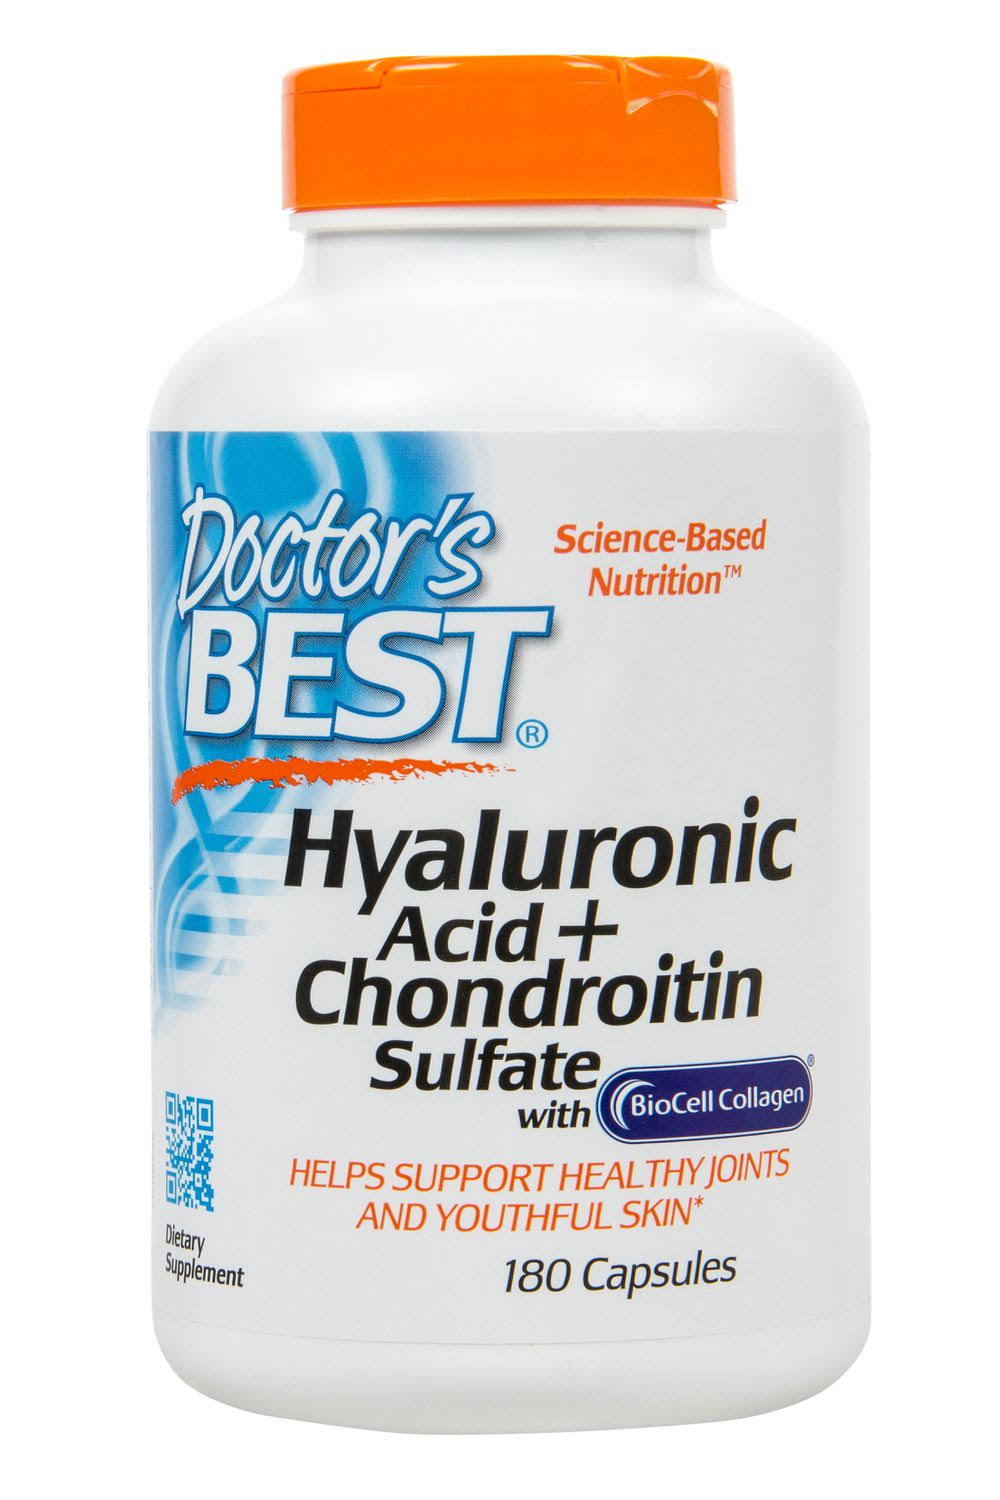 Doctor's Best Hyaluronic Acid with Chondroitin Sulfate Supplement - 180 Capsules